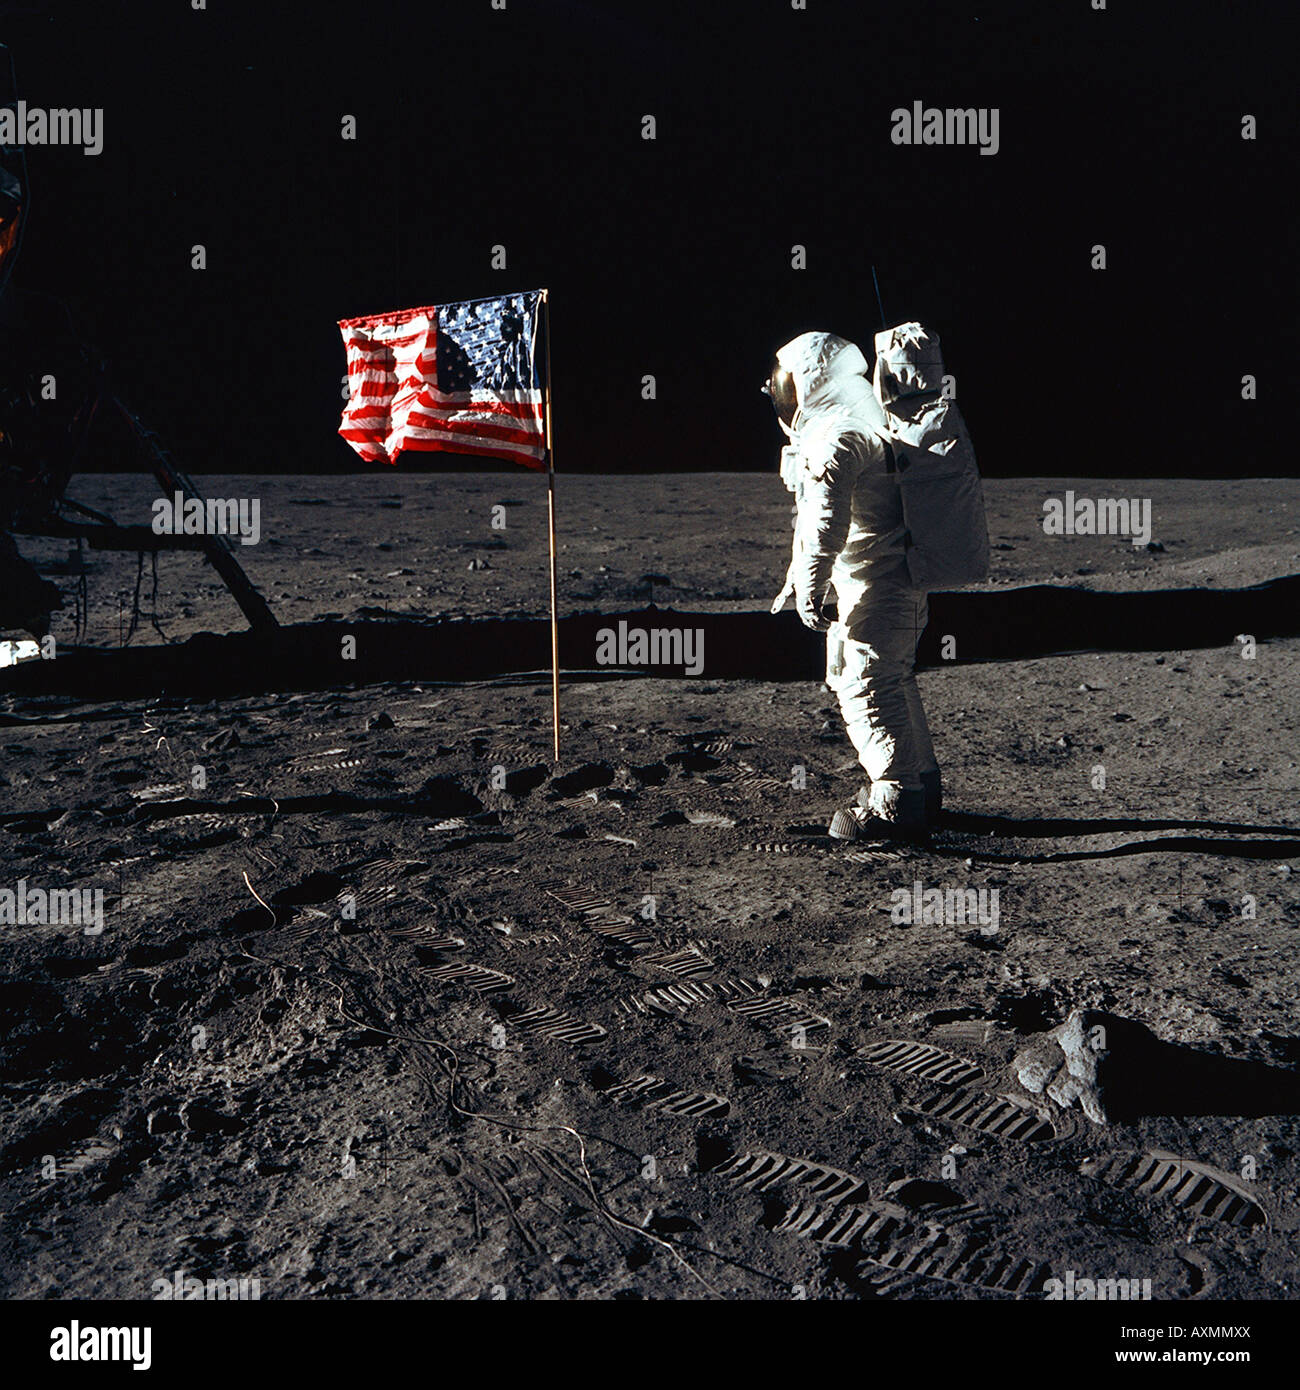 Astronaut Buzz Aldrin lunar module pilot of the first lunar landing mission poses for a photograph beside the United States flag Stock Photo